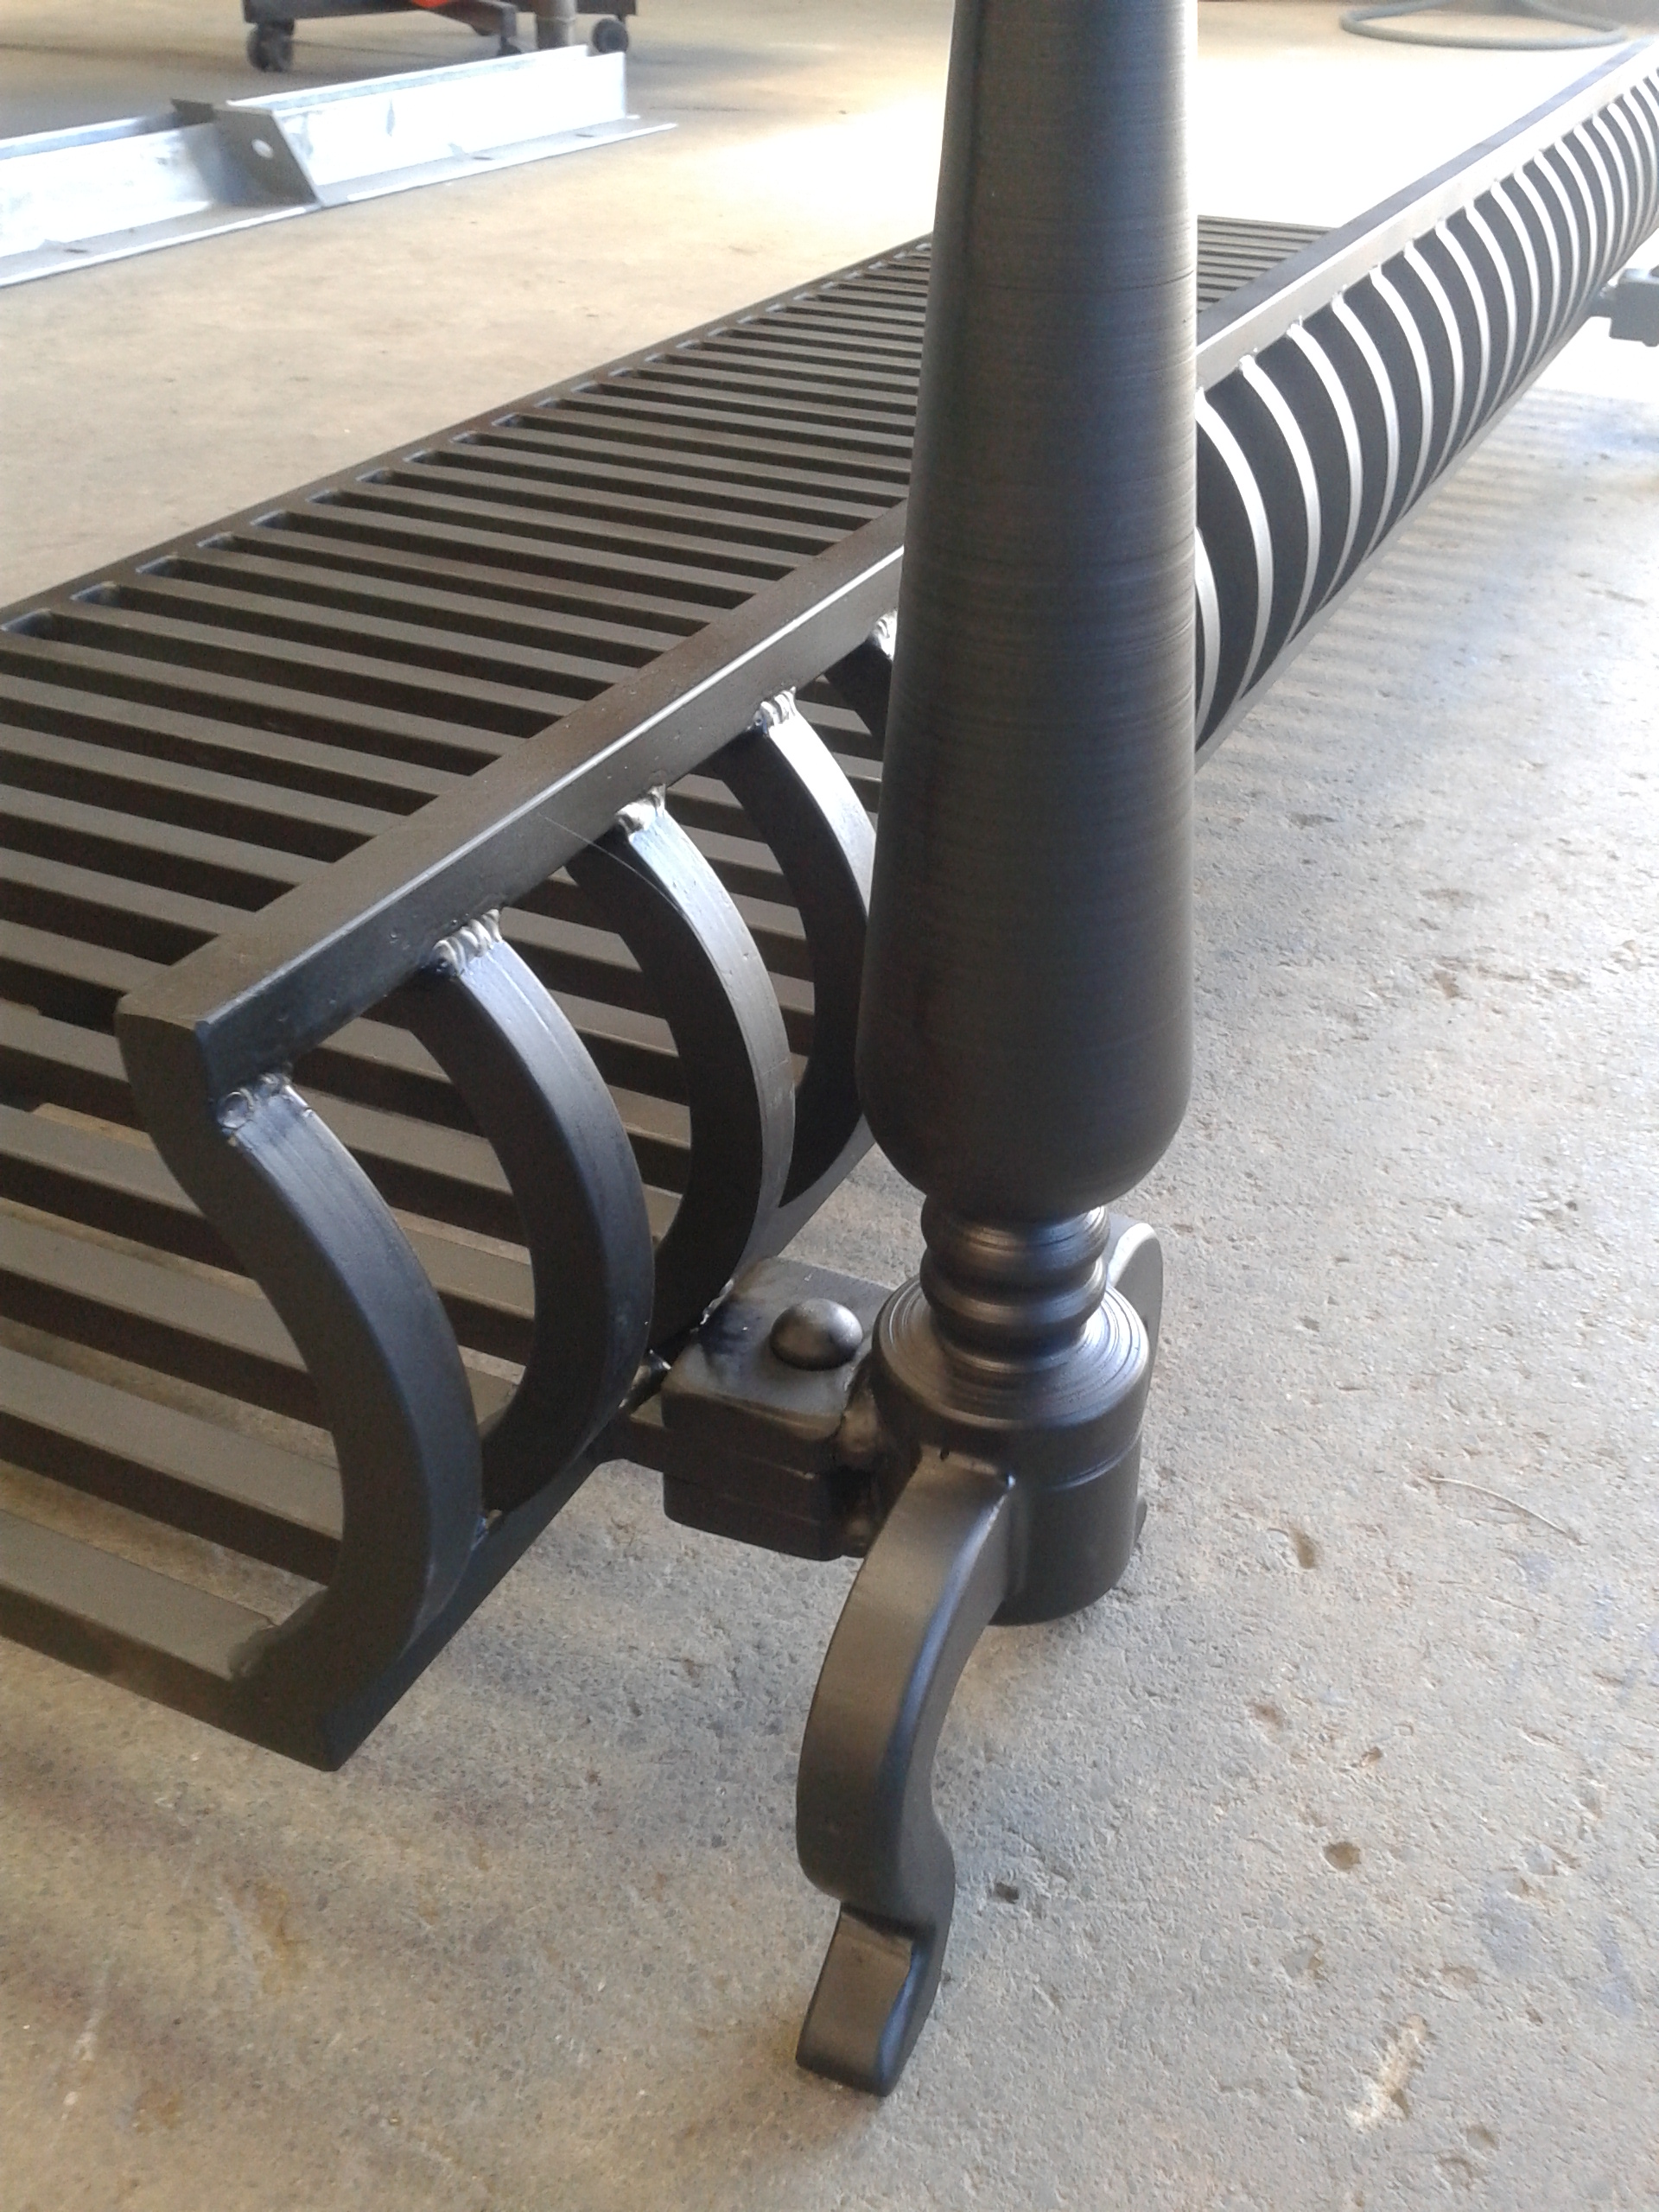 Fireplace Grate with Blower Beautiful Custom Made Steel Grate and Fineals for Large Open Fireplace